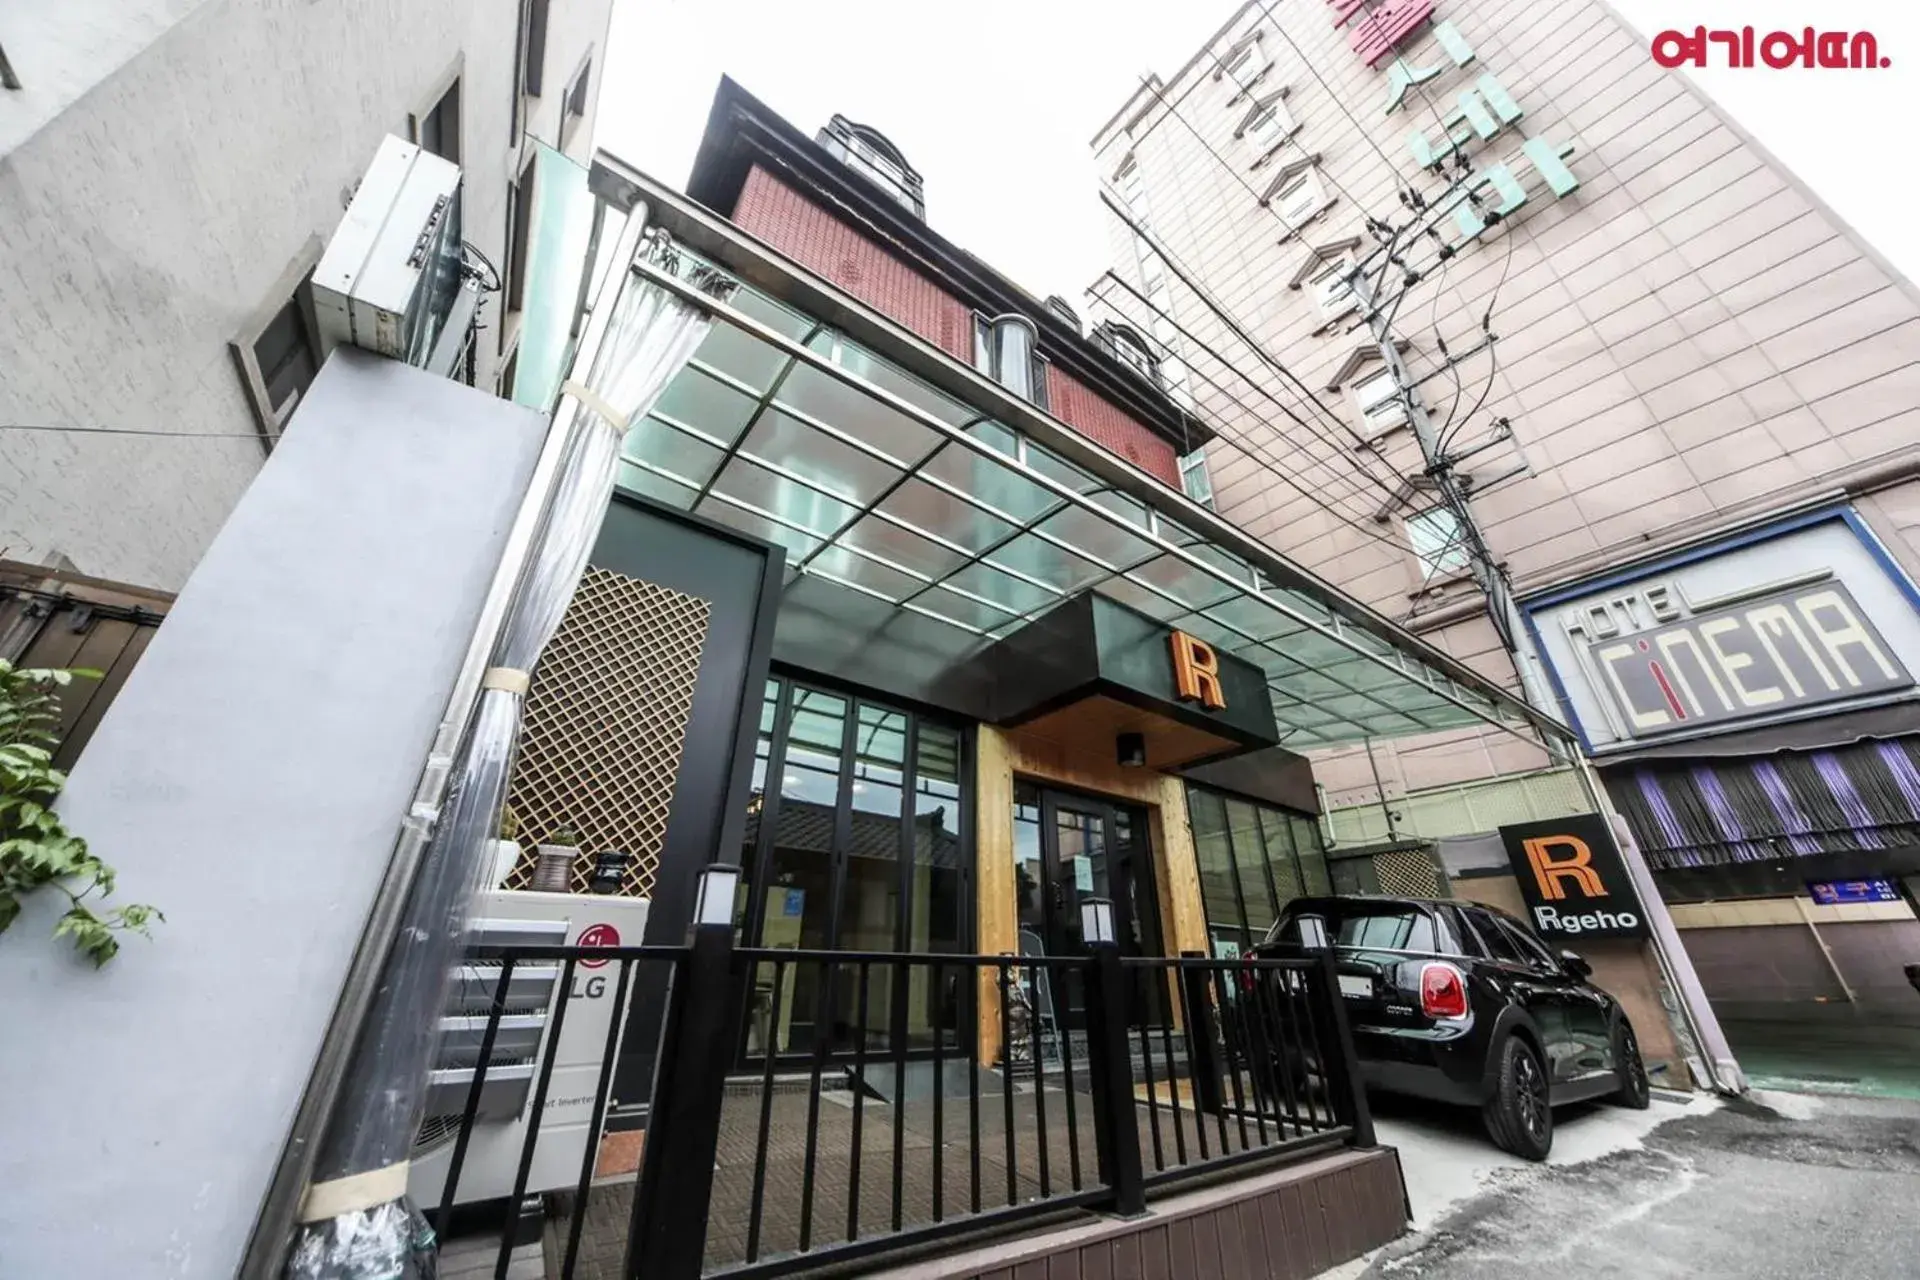 Property Building in Insadong R Guesthouse